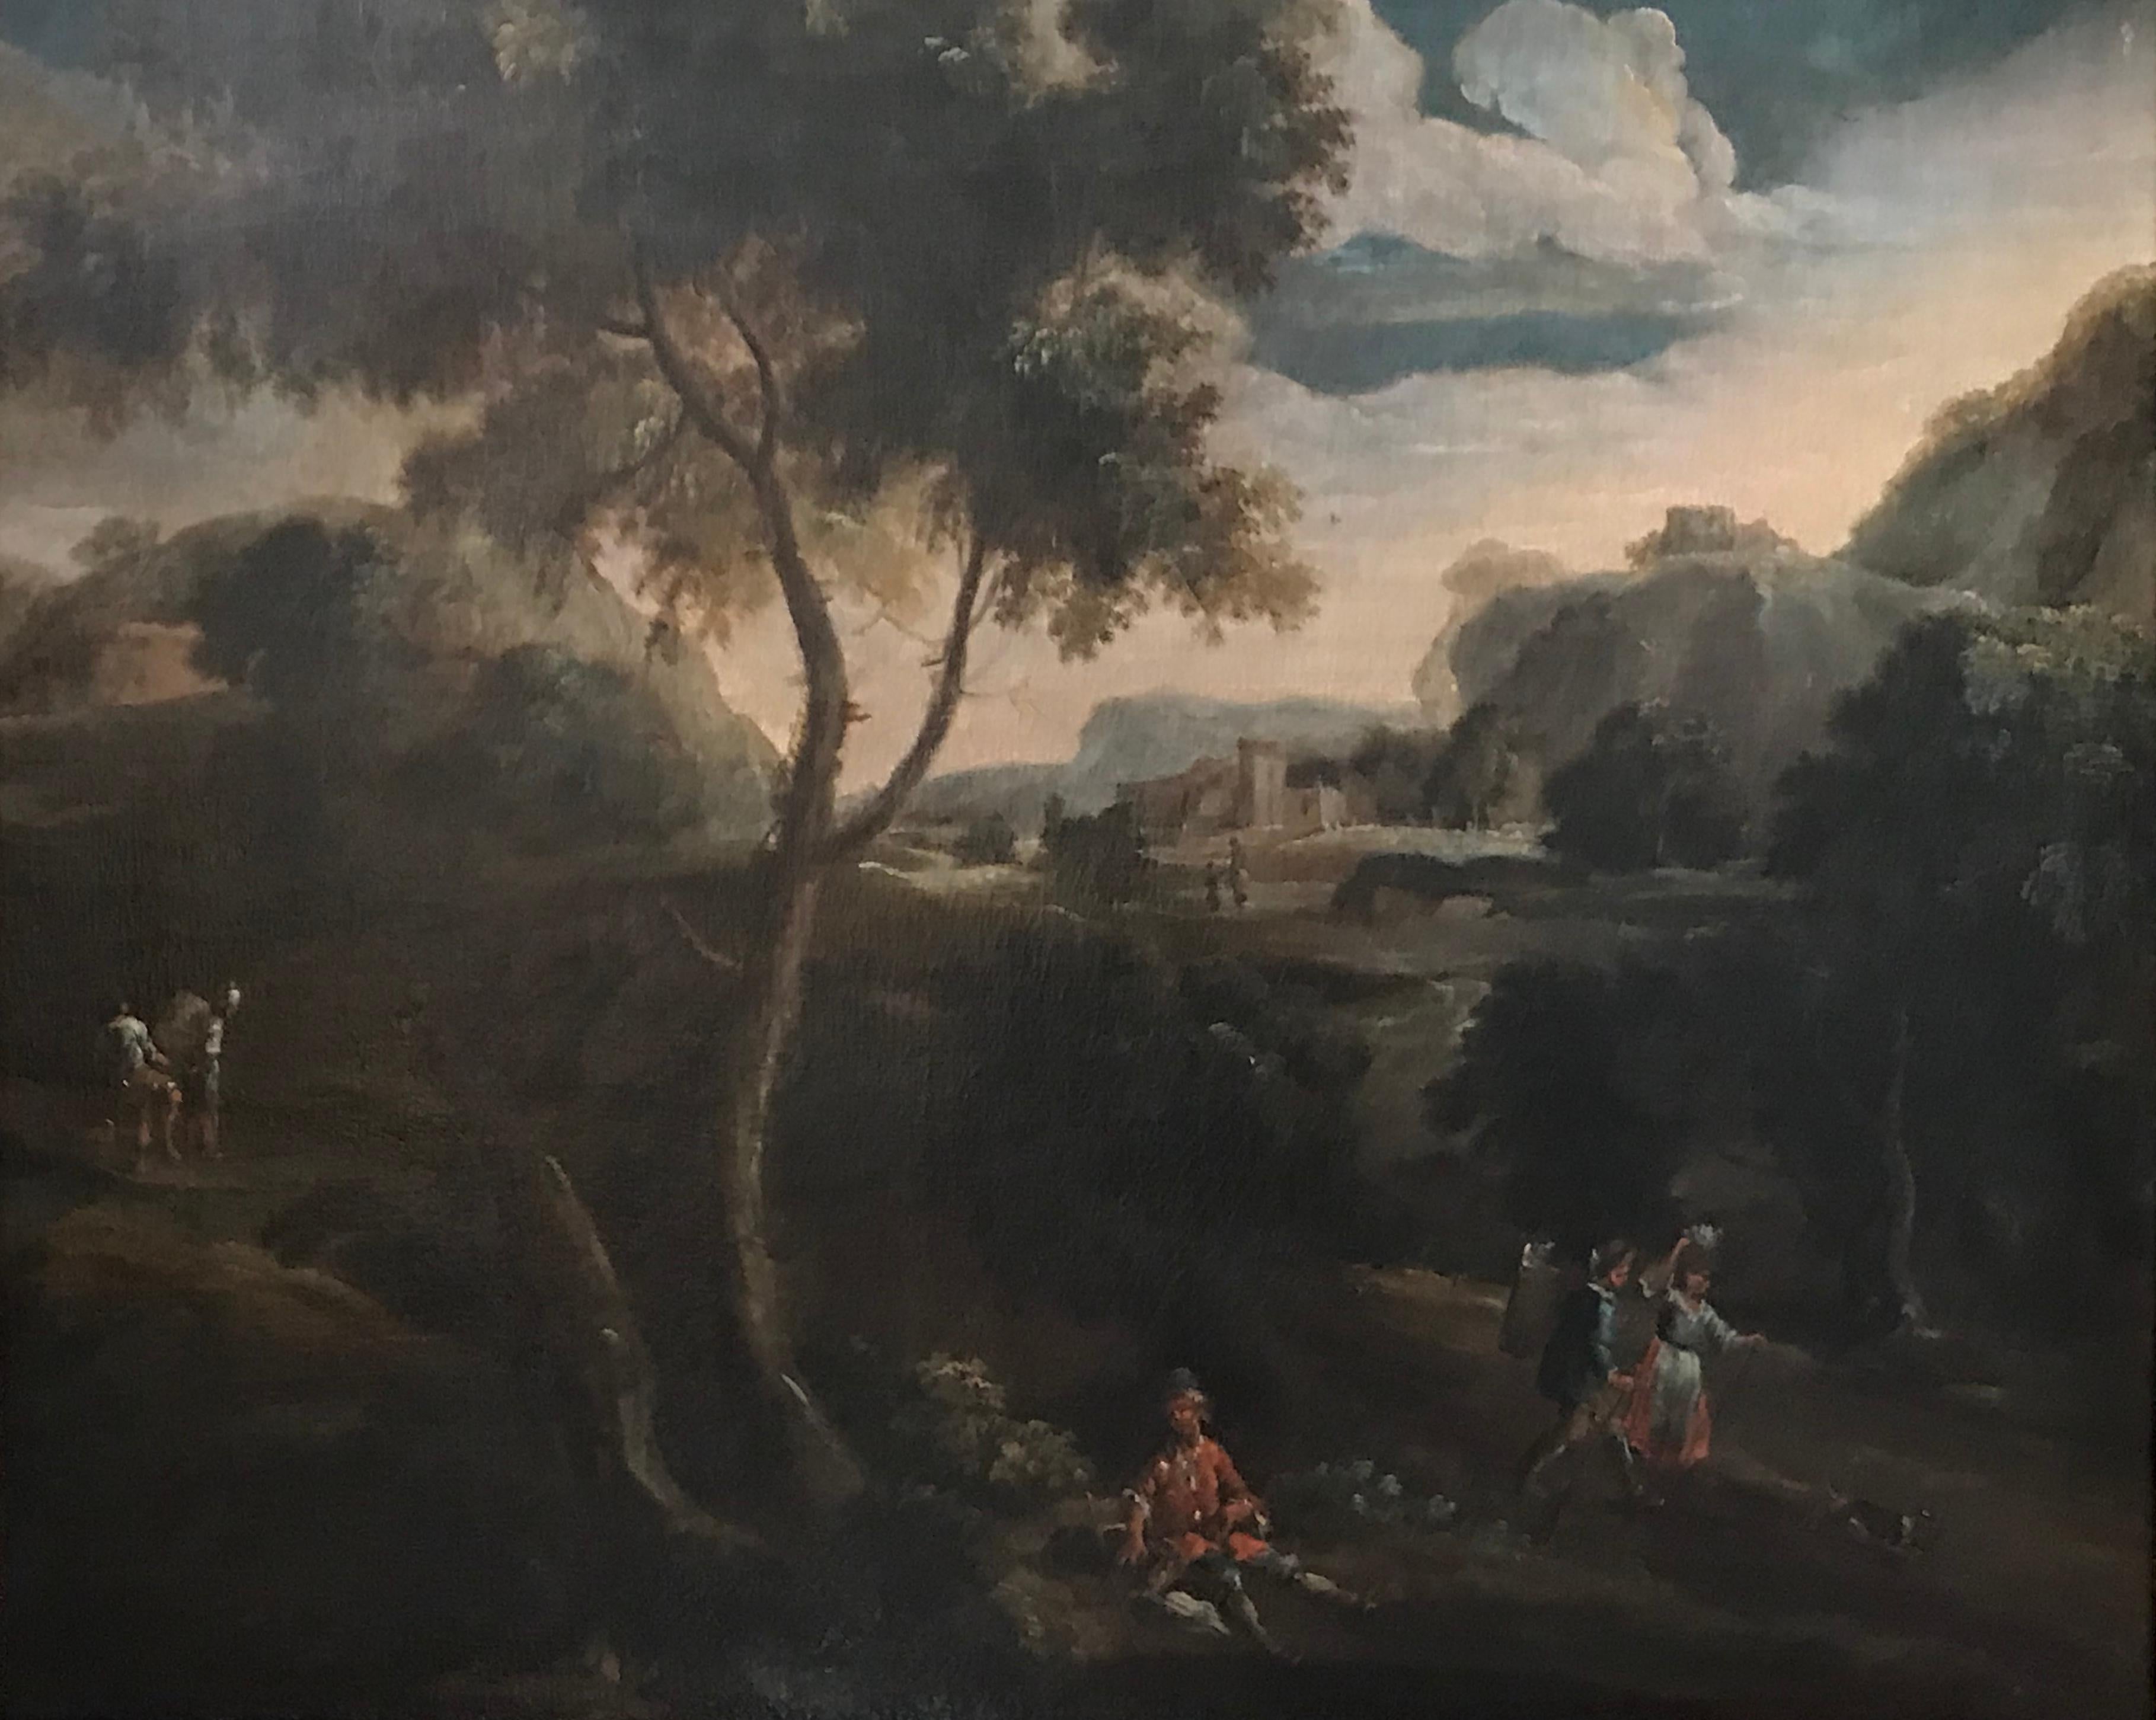 Unknown Landscape Painting – Arcadian Landscape with Figures, circa 1740. Large Old Master oil painting